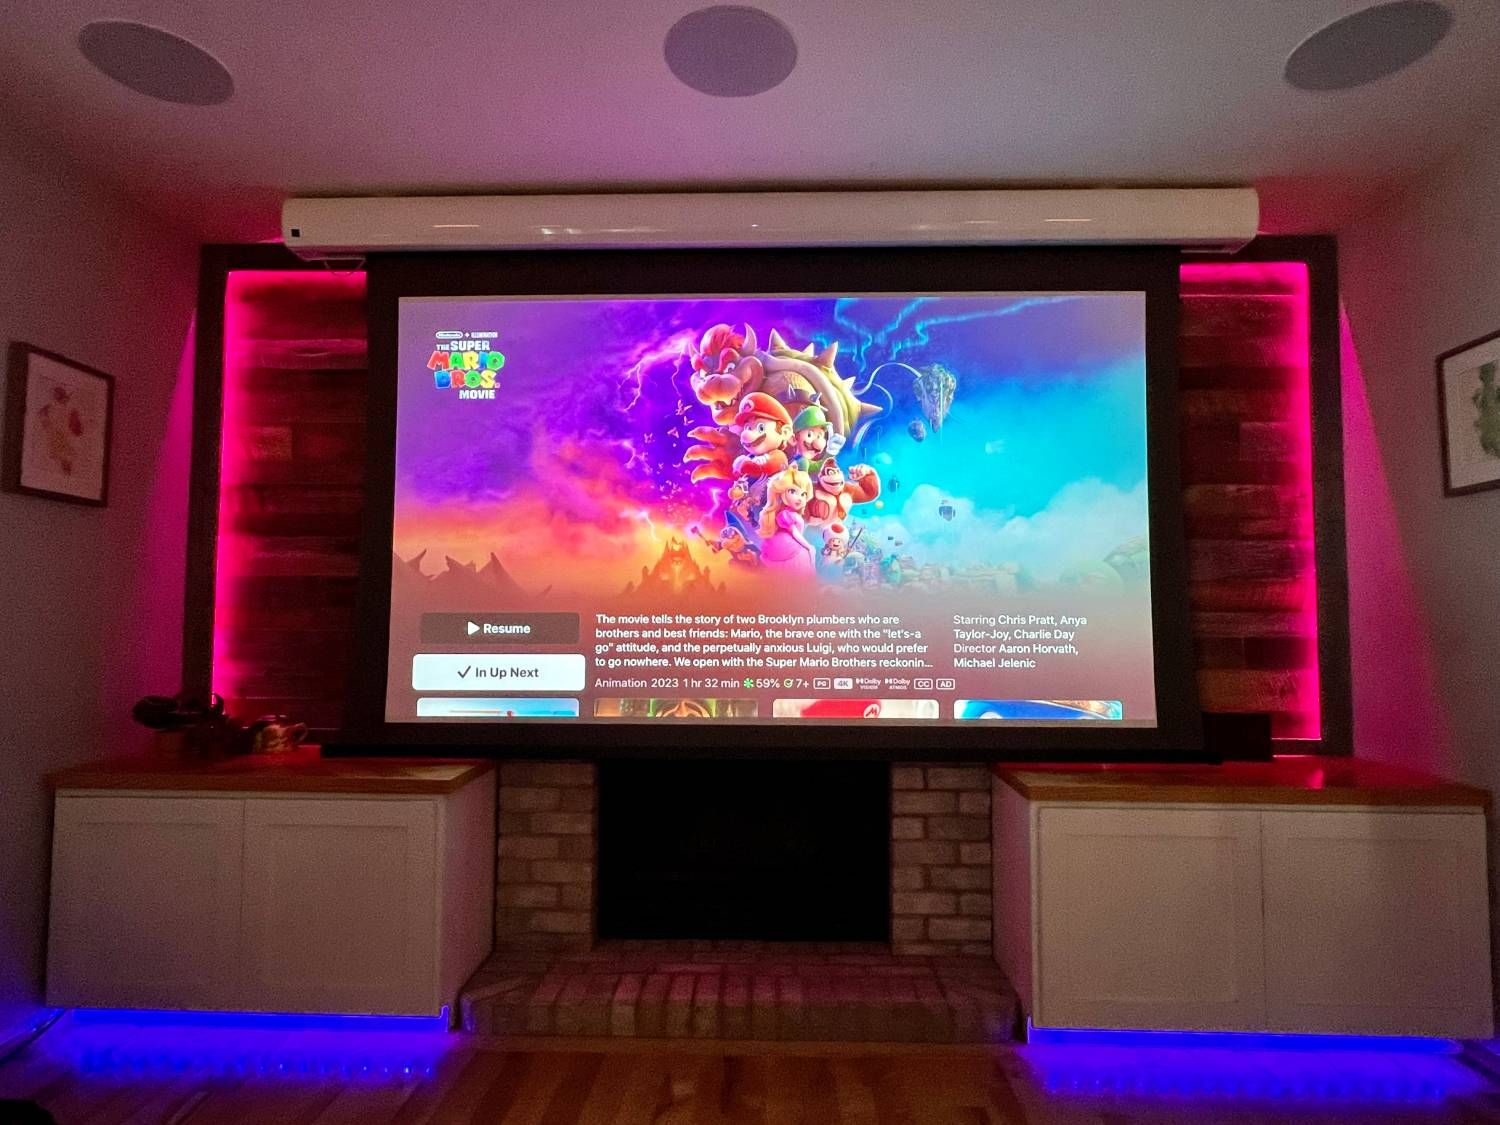 Projector screen with pink backlighting